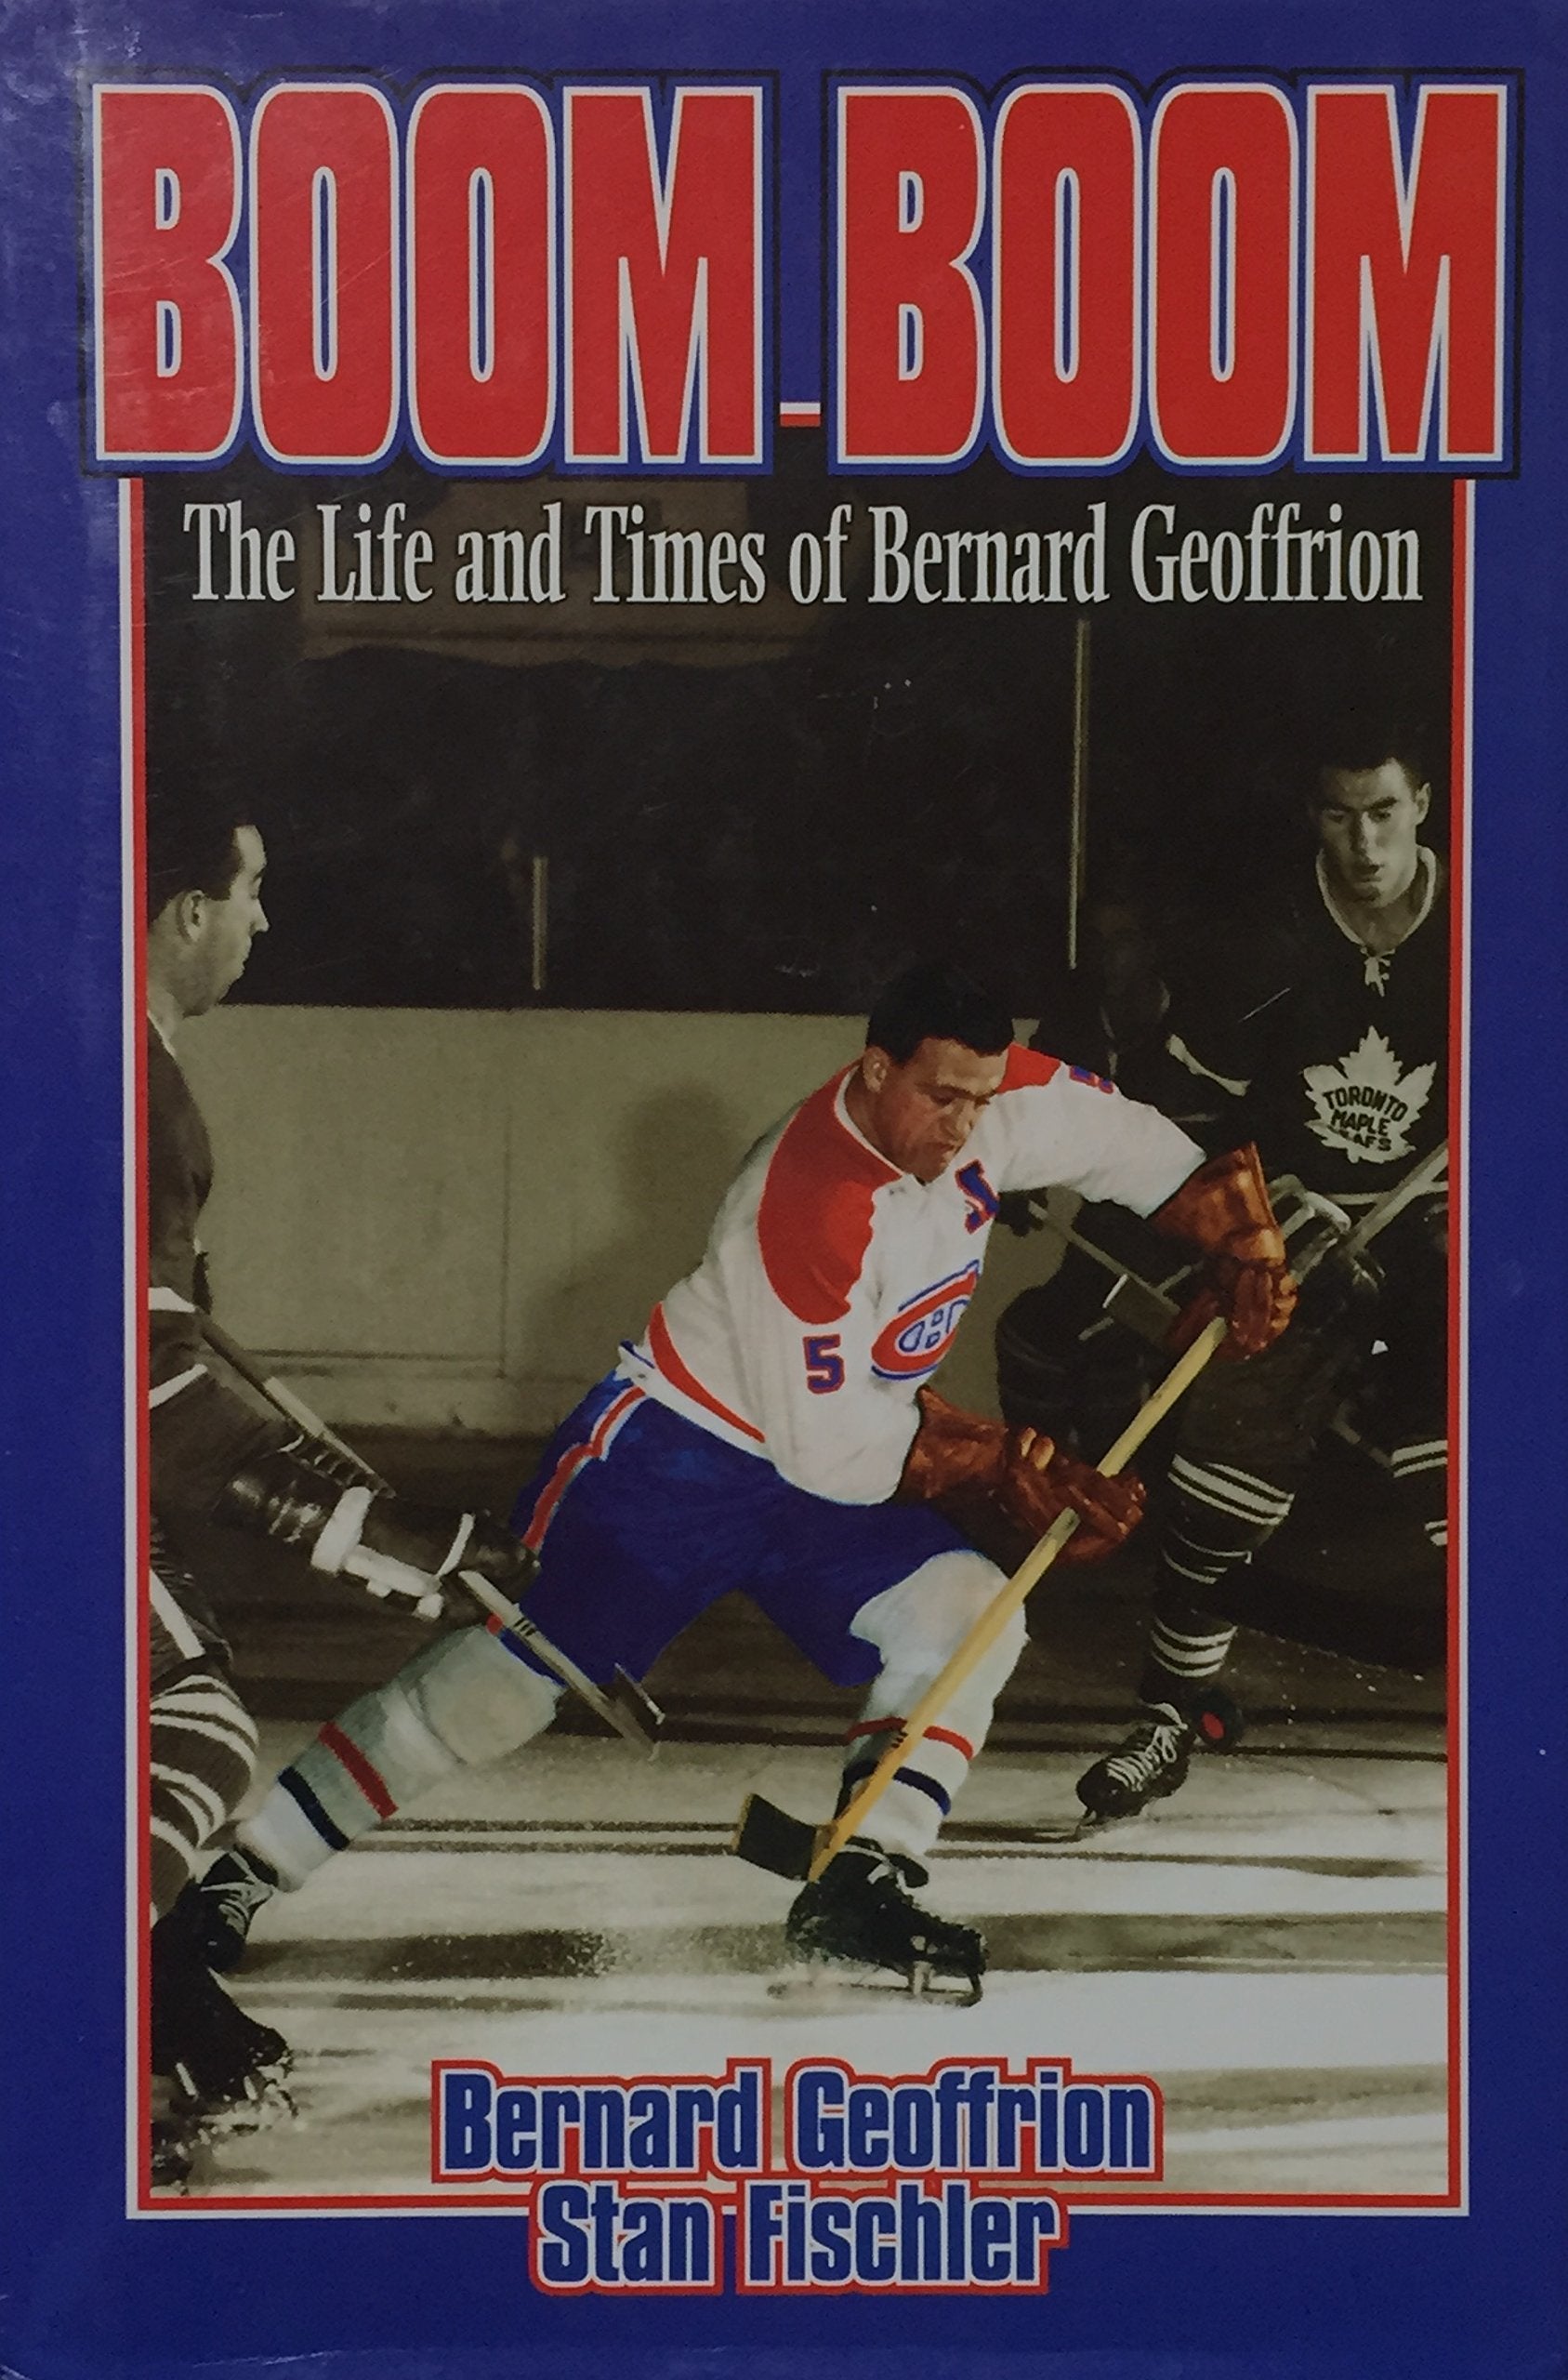 Livre ISBN 0075527154 Boom Boom Geffrion: The Life and Times of Bernard Geoffrion (Bernard Geoffrion)